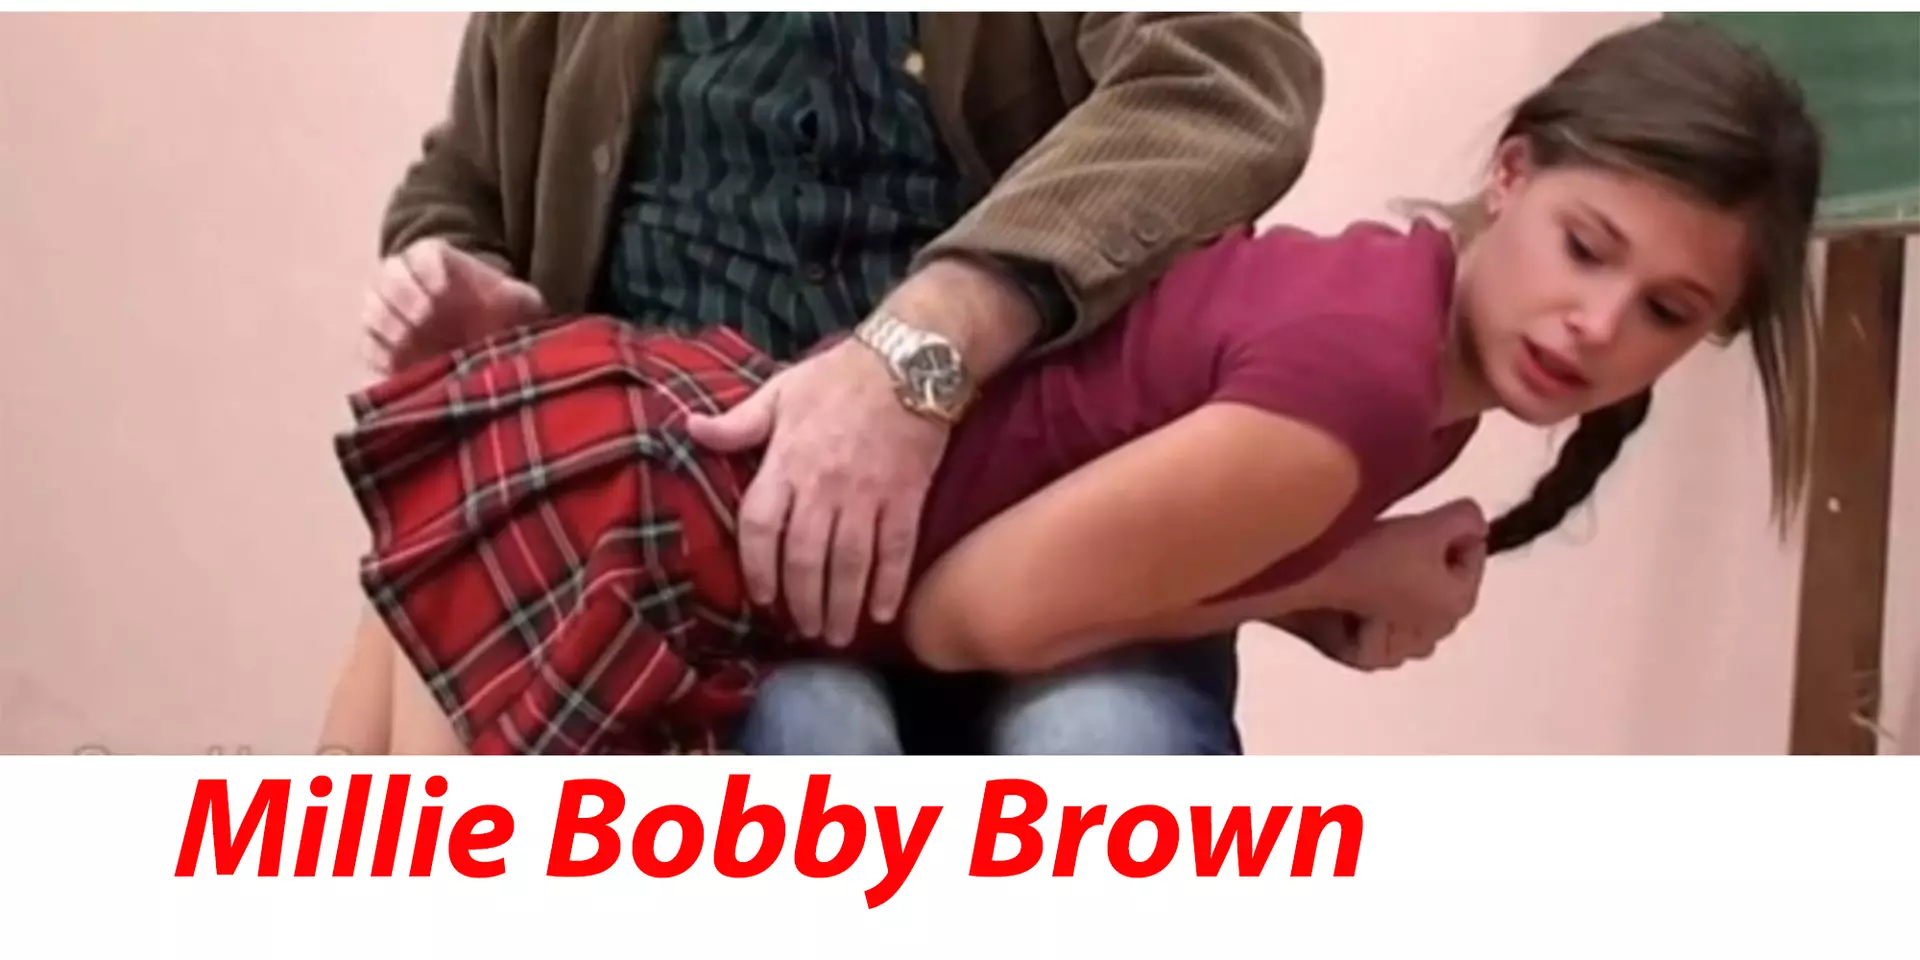 Milly bobby brown deepfakes